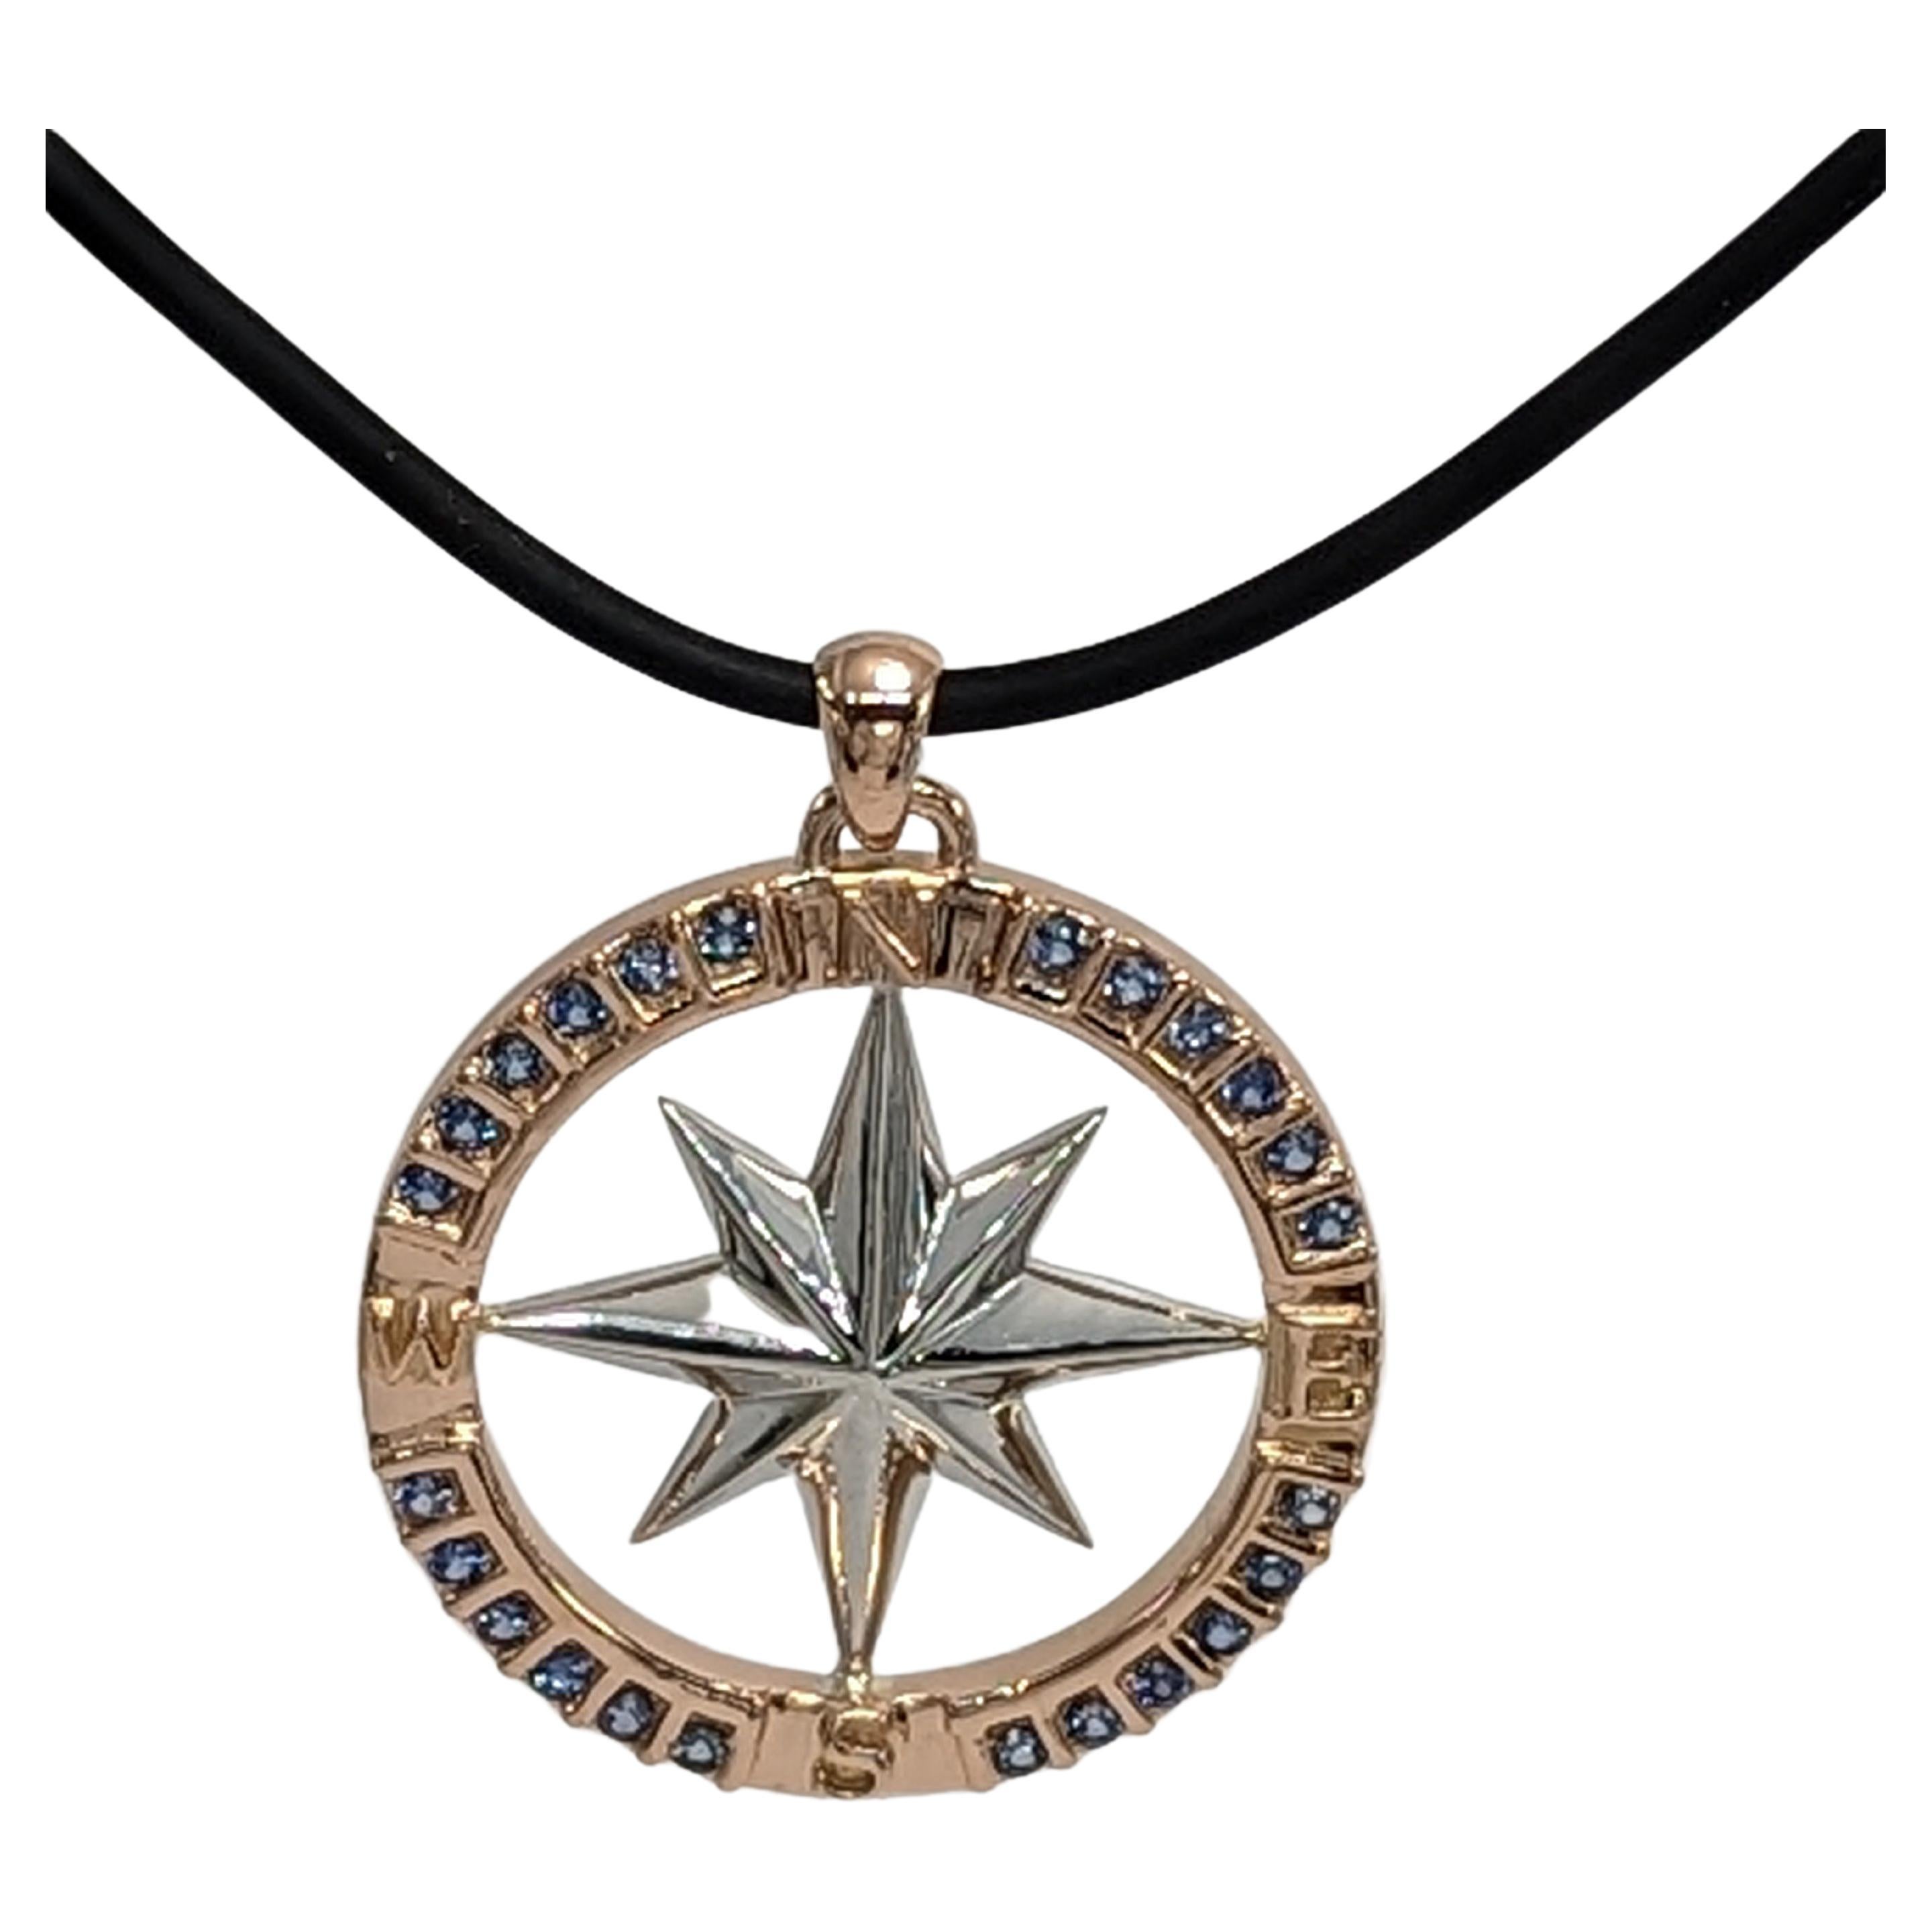  18 Karat Rose Gold  and Sterling  Sapphires Sailors Compass Pendant, For you water and wind lovers. Tiffany Designer , Thomas Kurilla has not forgotten you mates. Inspired from antique sailor's compasses. A sailing lover as well. Wear this and